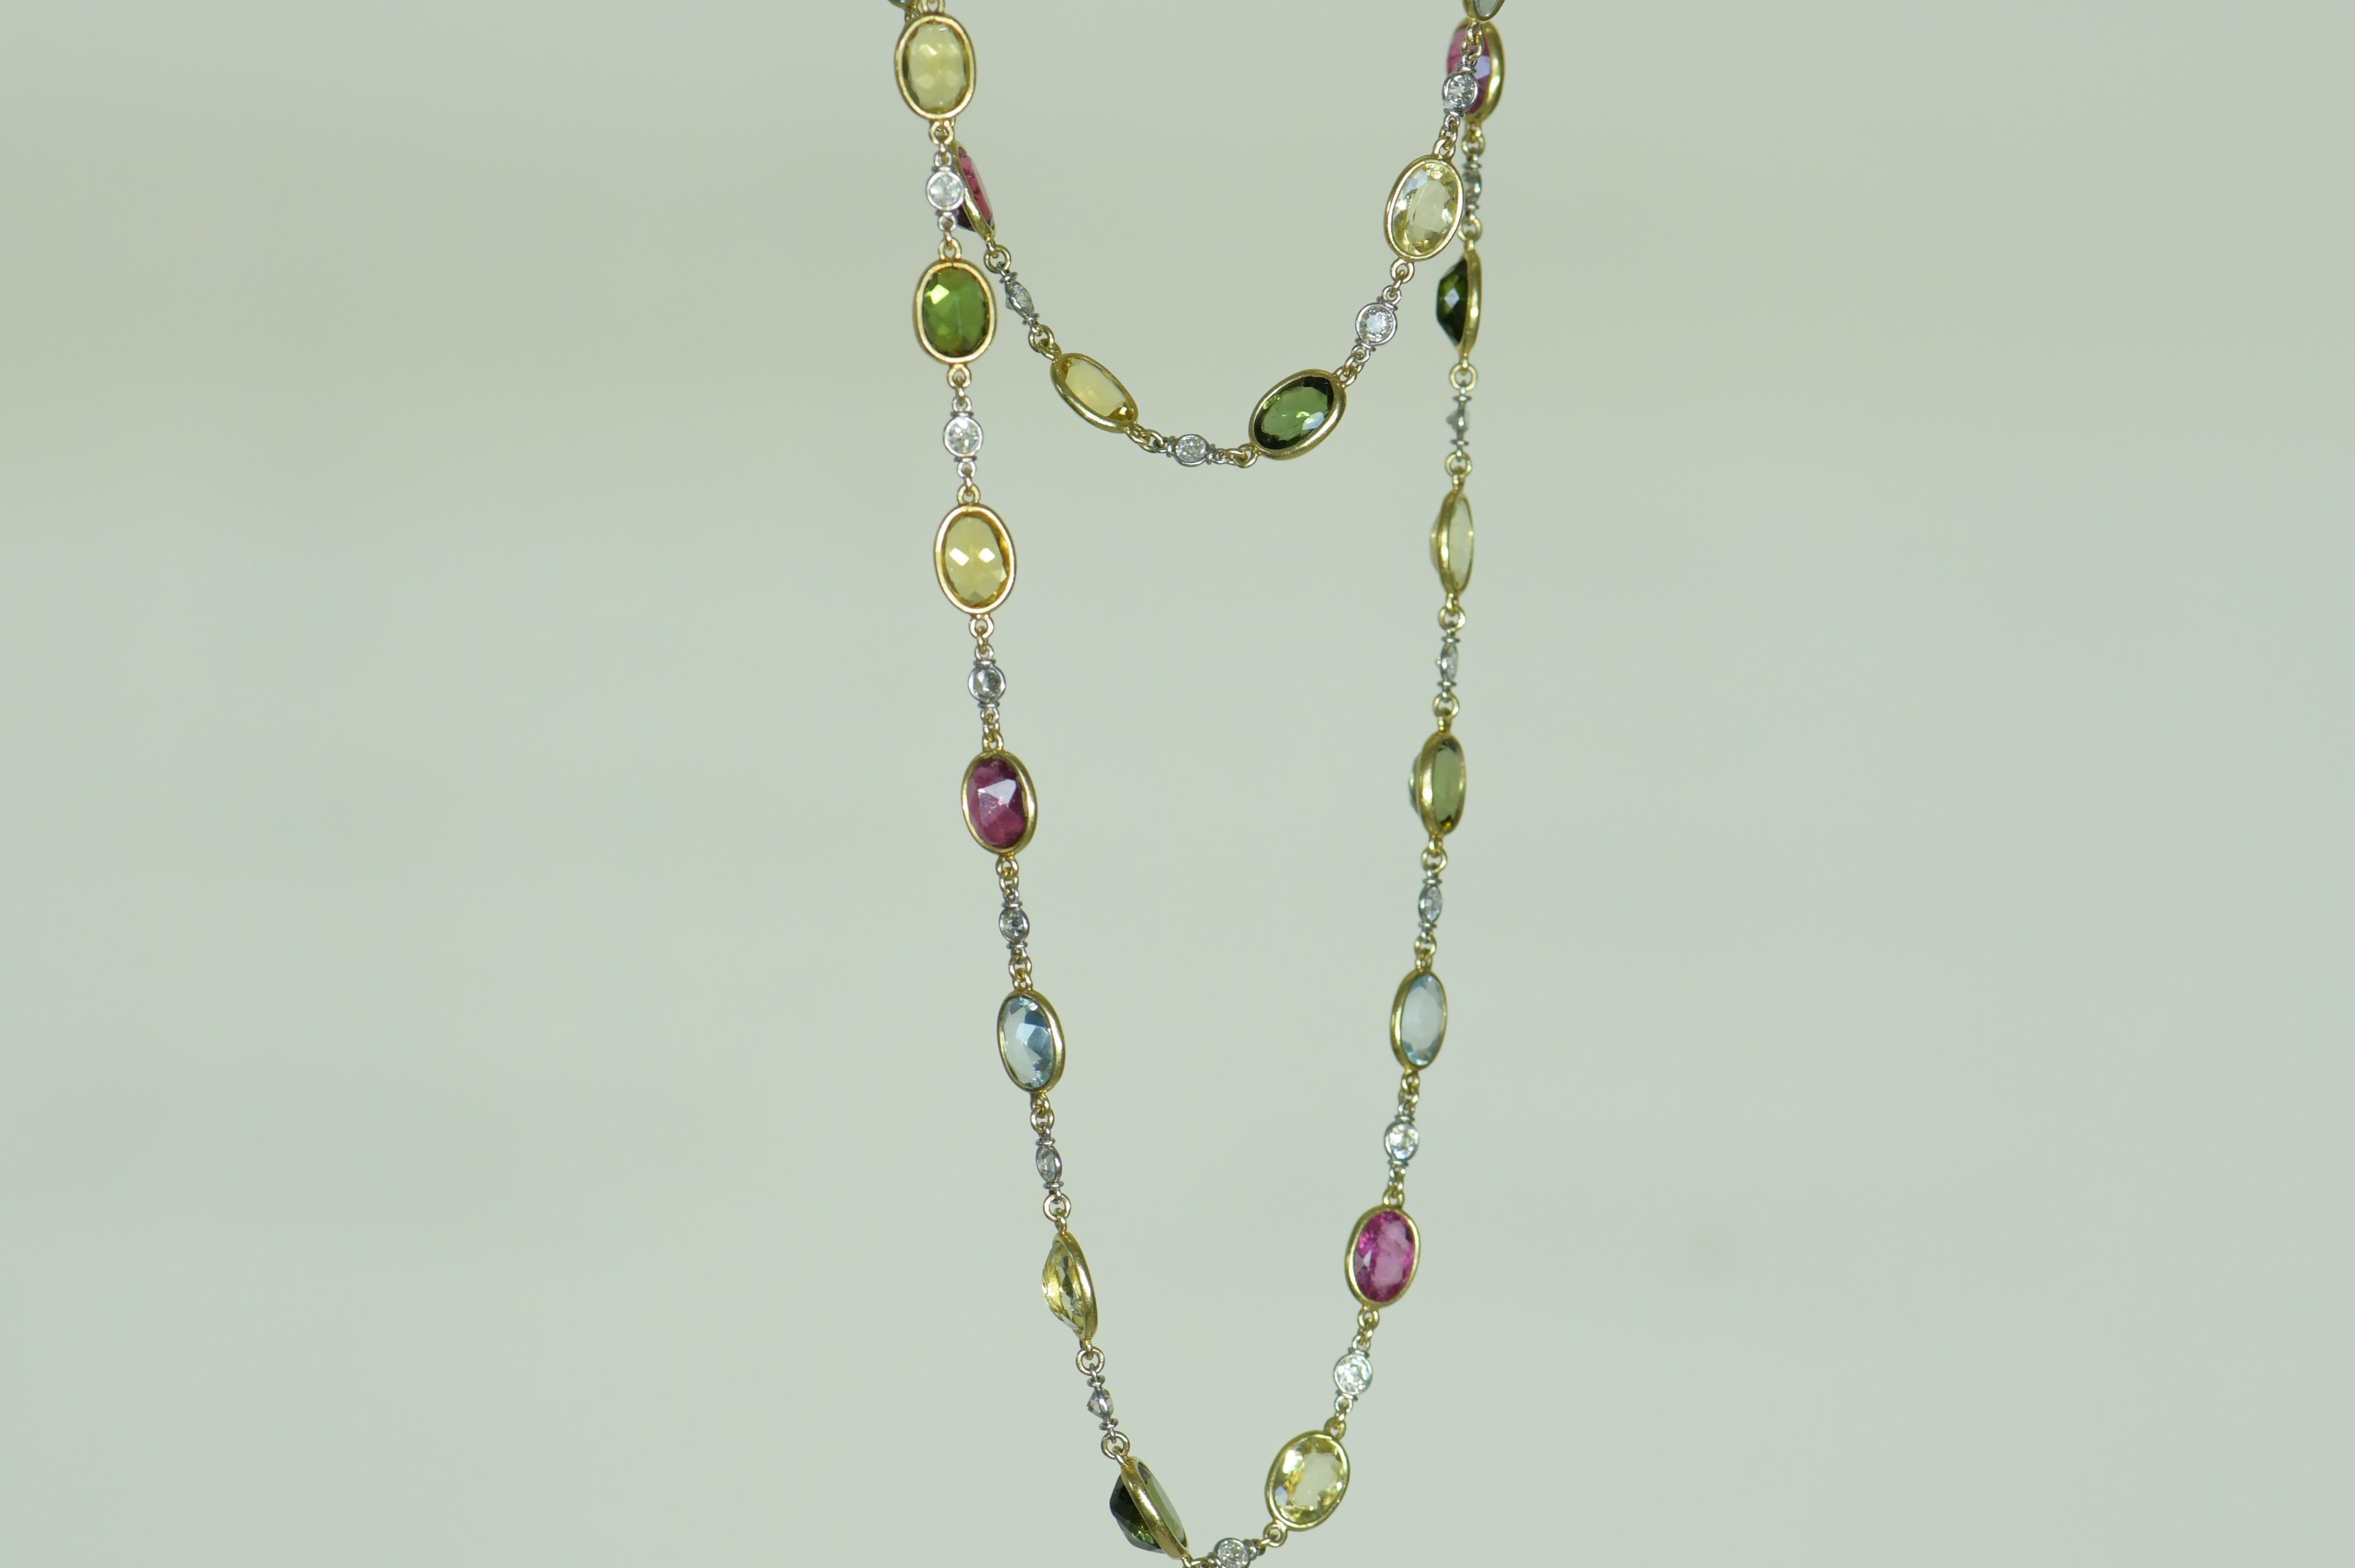 A very elegant Edwardian yellow gold necklace contains 29.50 ct of peridot, citrine, yellow sapphire, aquamarine, tourmaline, and diamonds. The rainbow of colors makes this necklace versatile for an array of occasions and would be perfect for